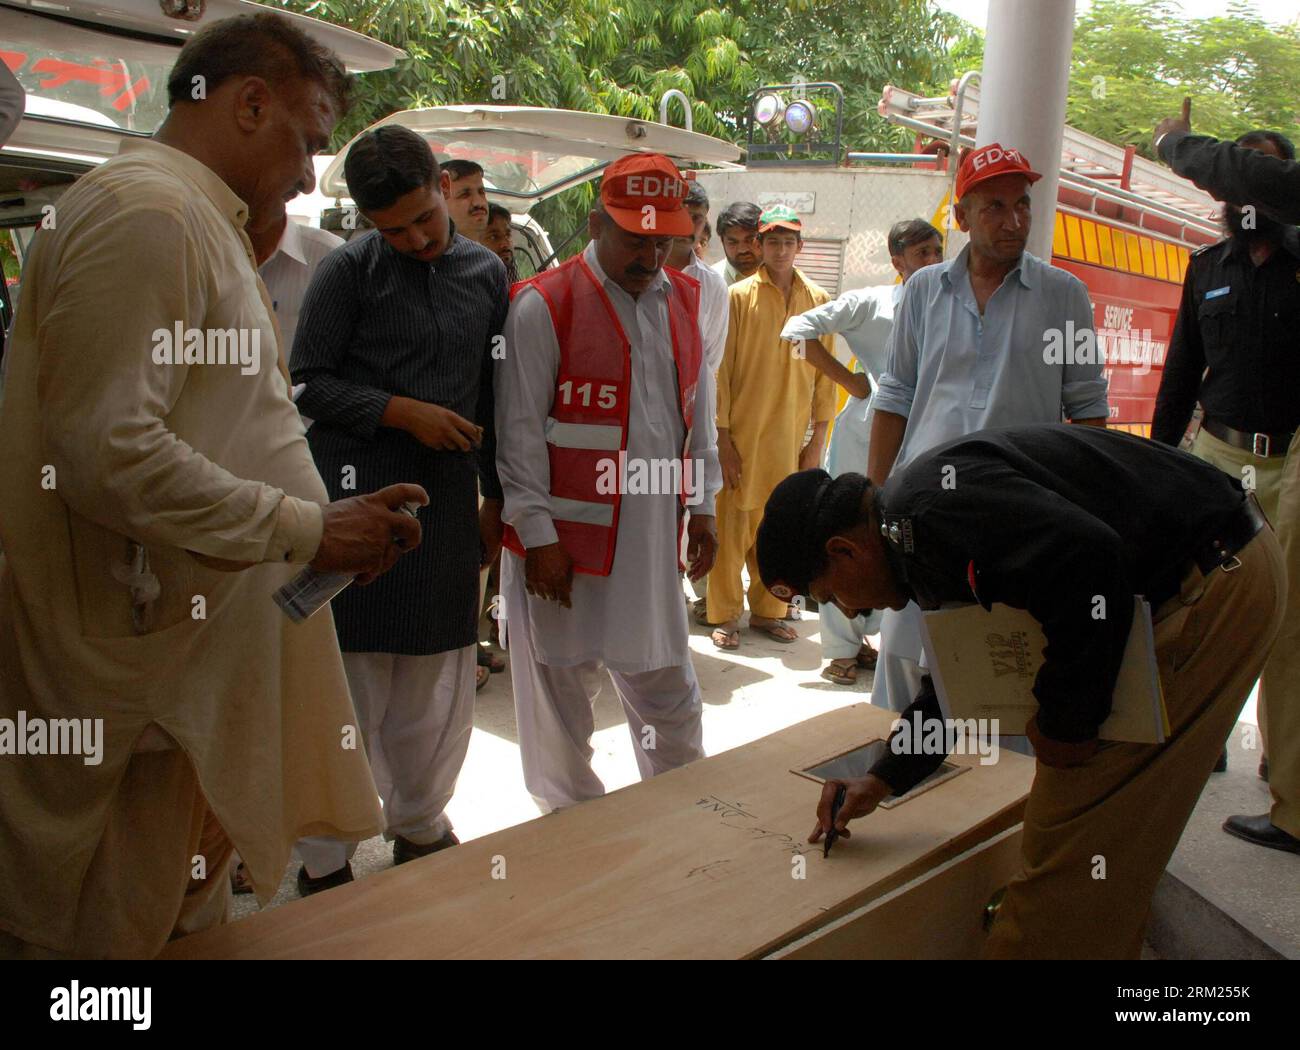 Bildnummer: 59700011  Datum: 25.05.2013  Copyright: imago/Xinhua (130525) -- GUJRAT (PAKISTAN), May 25, 2013 (Xinhua) -- A policeman writes a name on a coffin of a child who was killed in a school van gas cylinder blast on the outskirts of Gujrat, a district in Pakistan s eastern province of Punjab, on May 25, 2013. At least 15 children were killed in the school van gas cylinder blast that took place early Saturday morning in Gujrat, reported local media Dunya. (Xinhua/Stringer) (lr) PAKISTAN-GUJRAT-SCHOOL VAN GAS CYLINDER BLAST PUBLICATIONxNOTxINxCHN Gesellschaft Gasexplosion Schule Kind Opfe Stock Photo